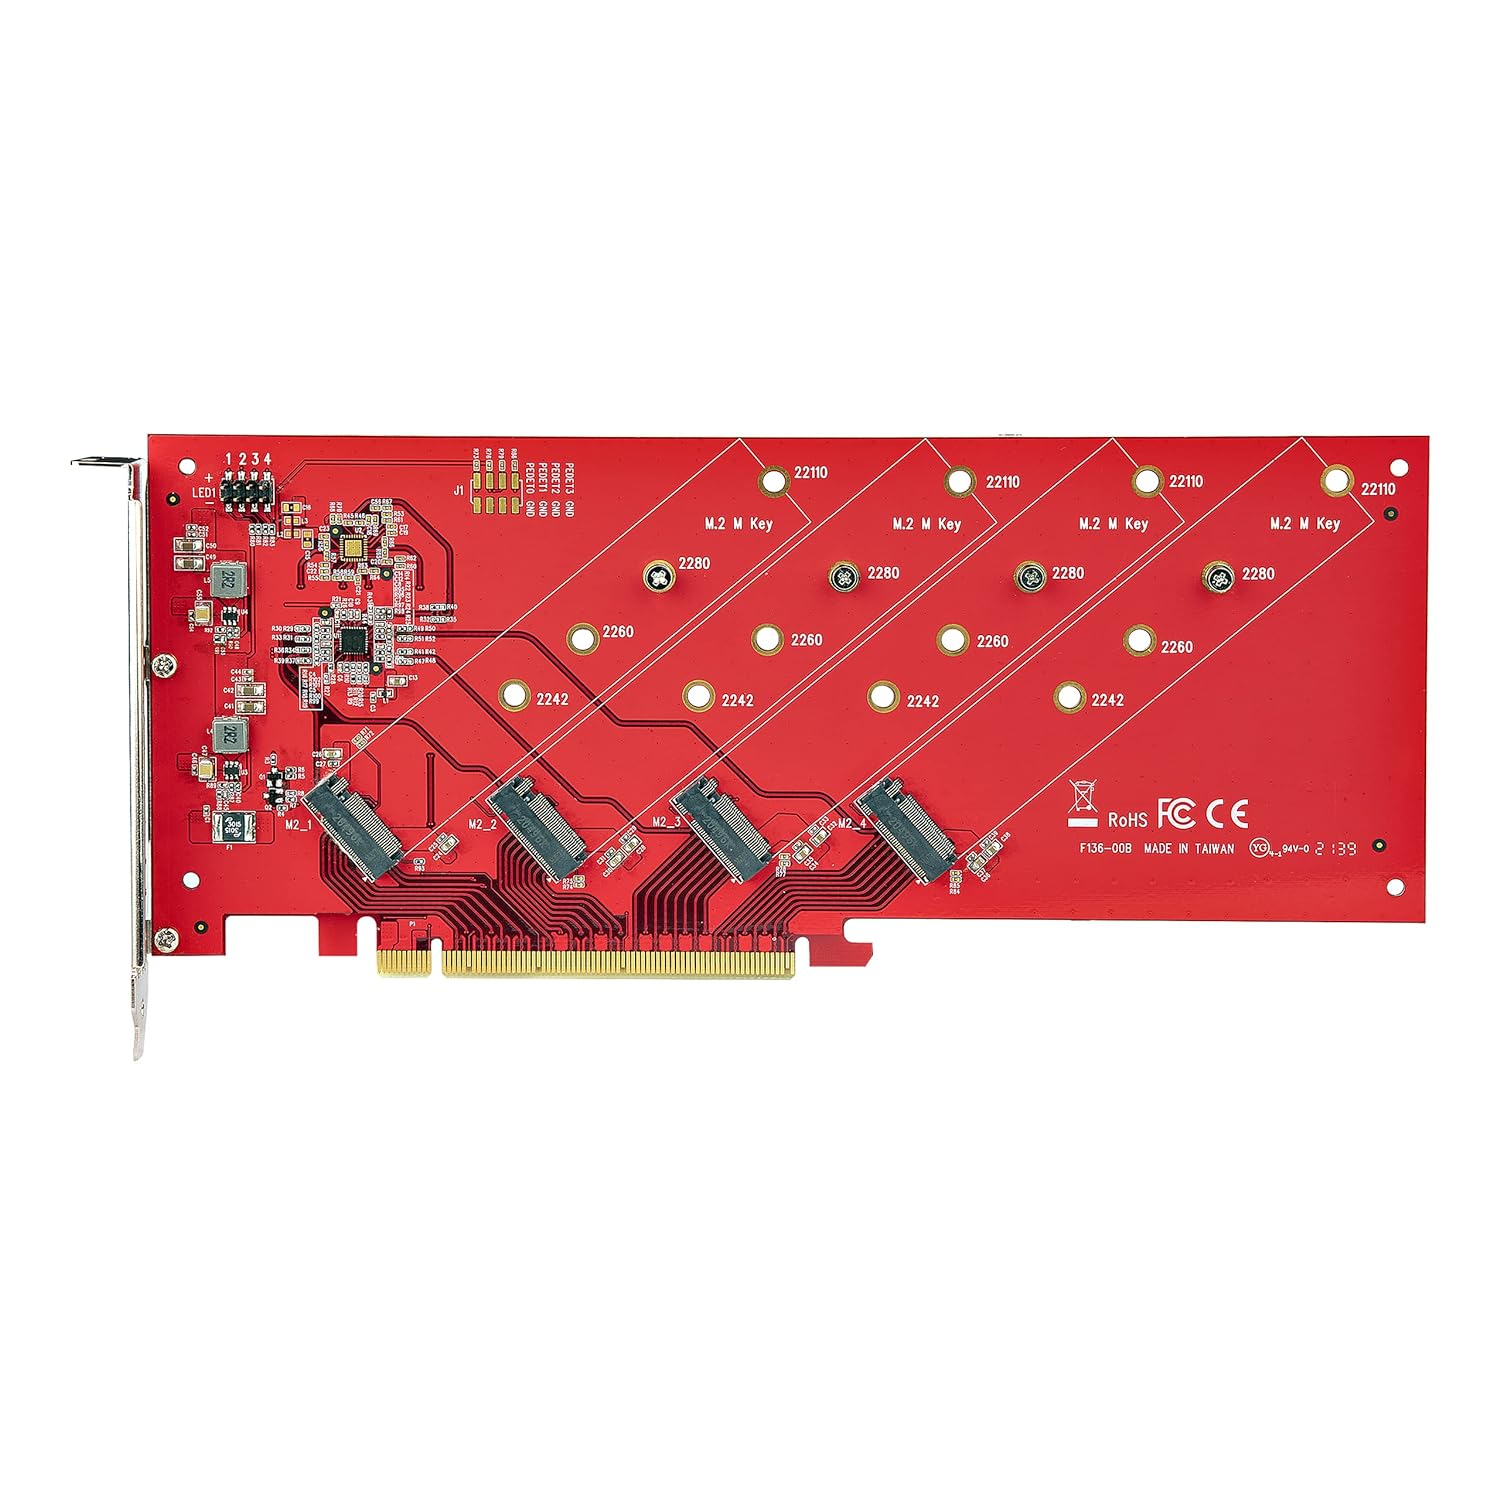 StarTech.com Quad M.2 PCIe Adapter Card, PCIe x16 to Quad NVMe or AHCI M.2 SSDs, PCI Express 4.0, 7.8GBps/Drive, Bifurcation Required, Windows/Linux Compatible (QUAD-M2-PCIE-CARD-B)